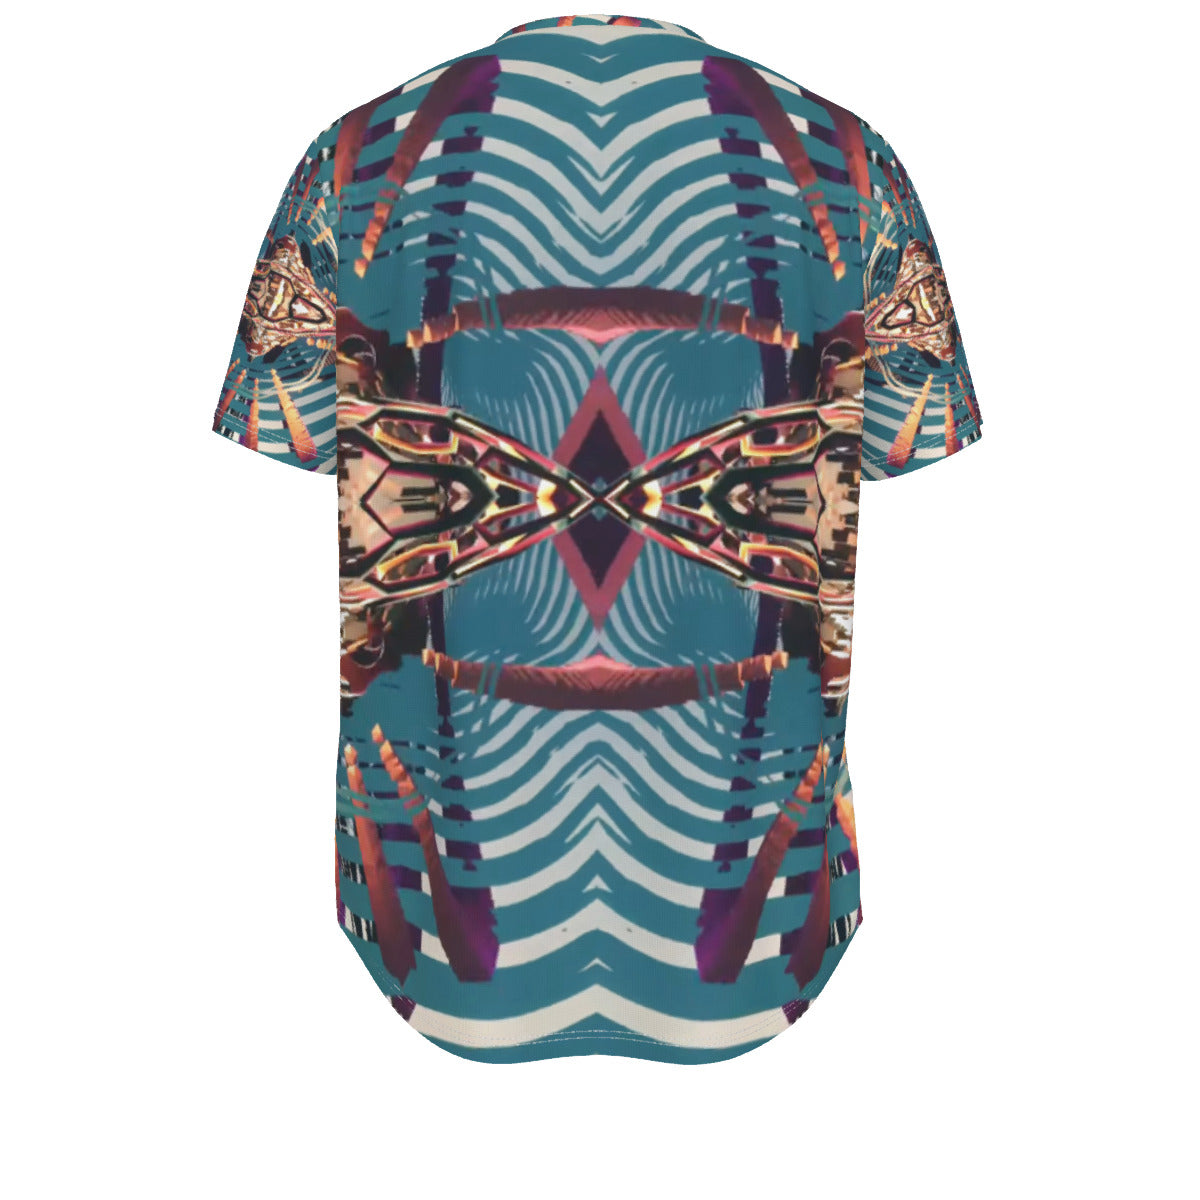 Psychedelic Orbopus All-Over Print Men's Short Sleeve T-shirt